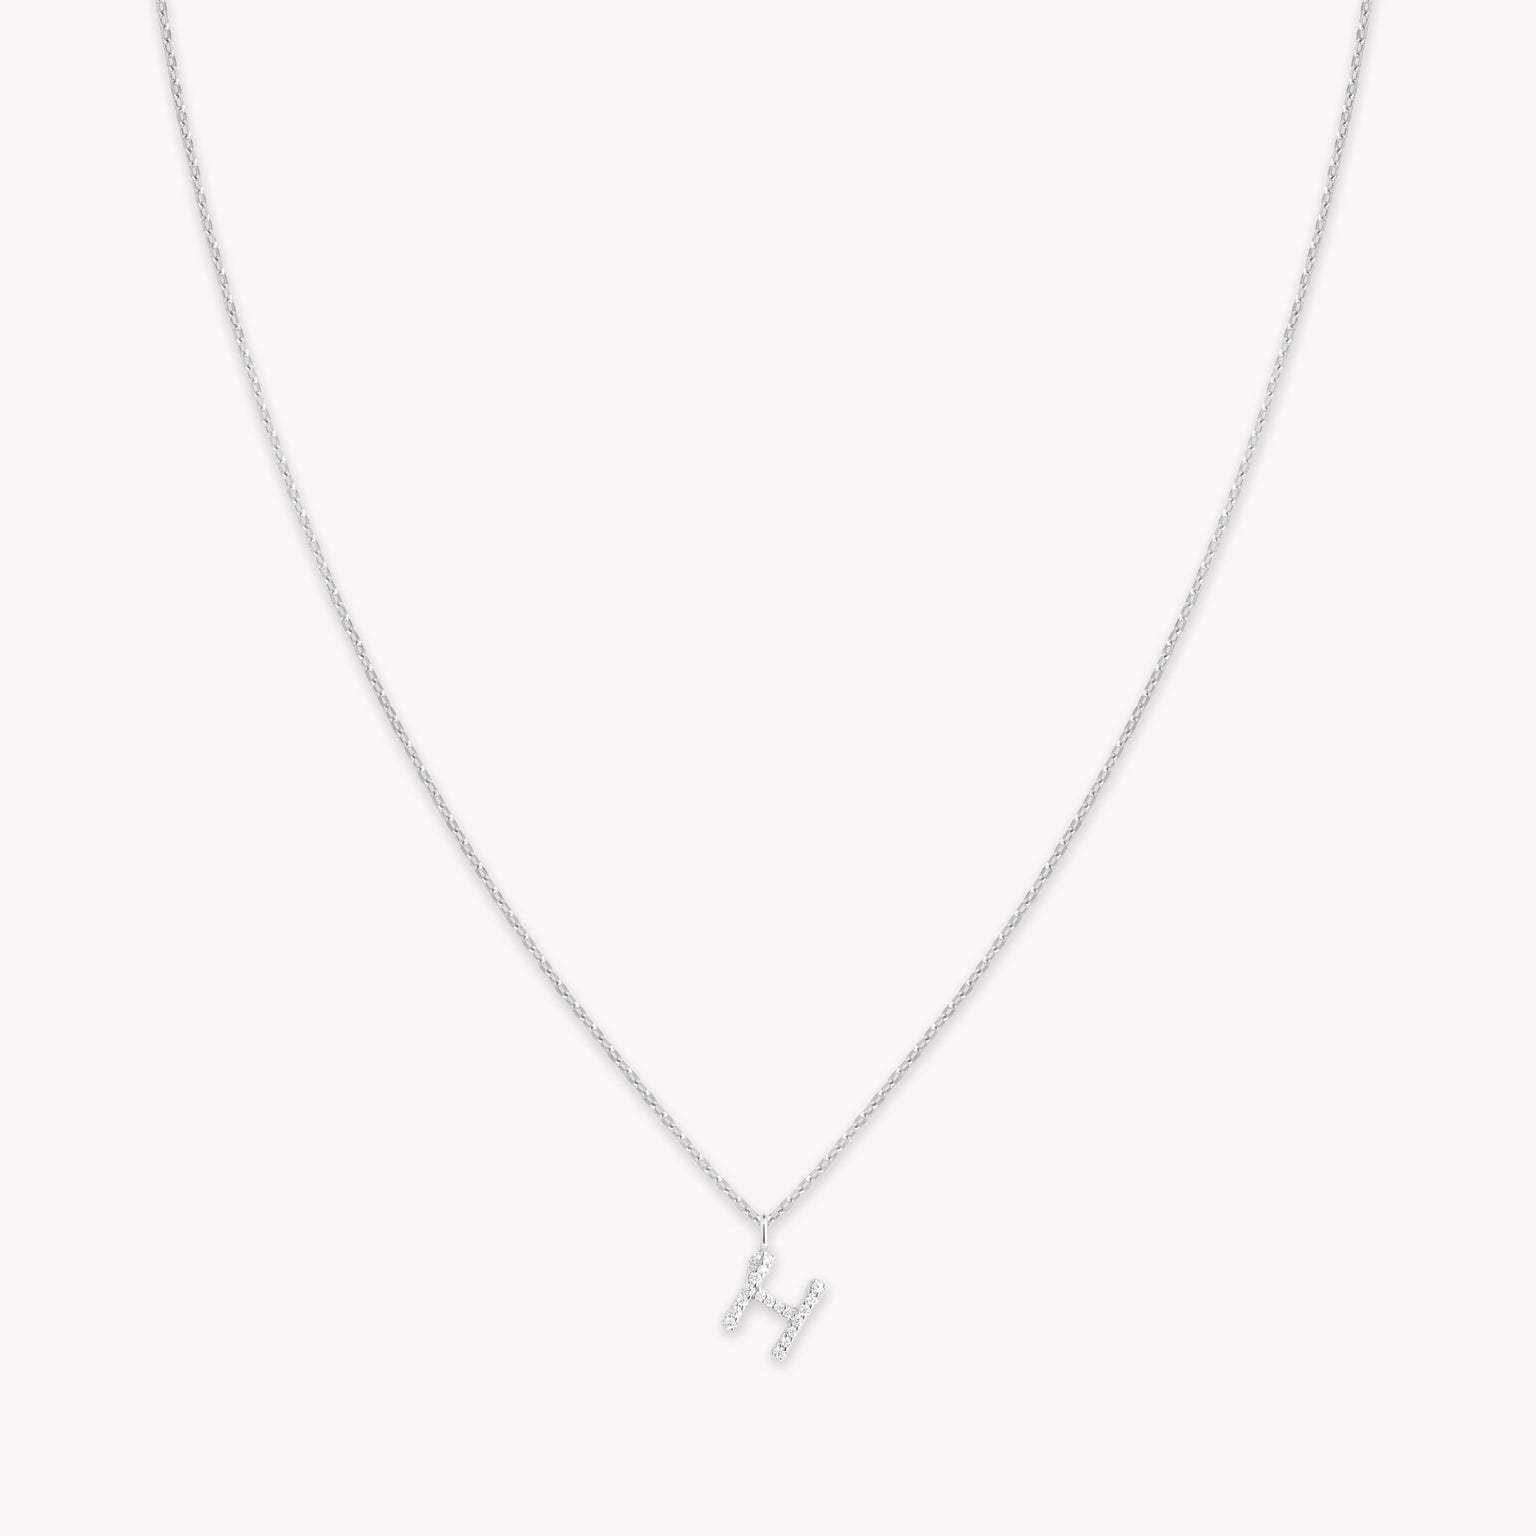 H Initial Pavé Pendant Necklace in Silver